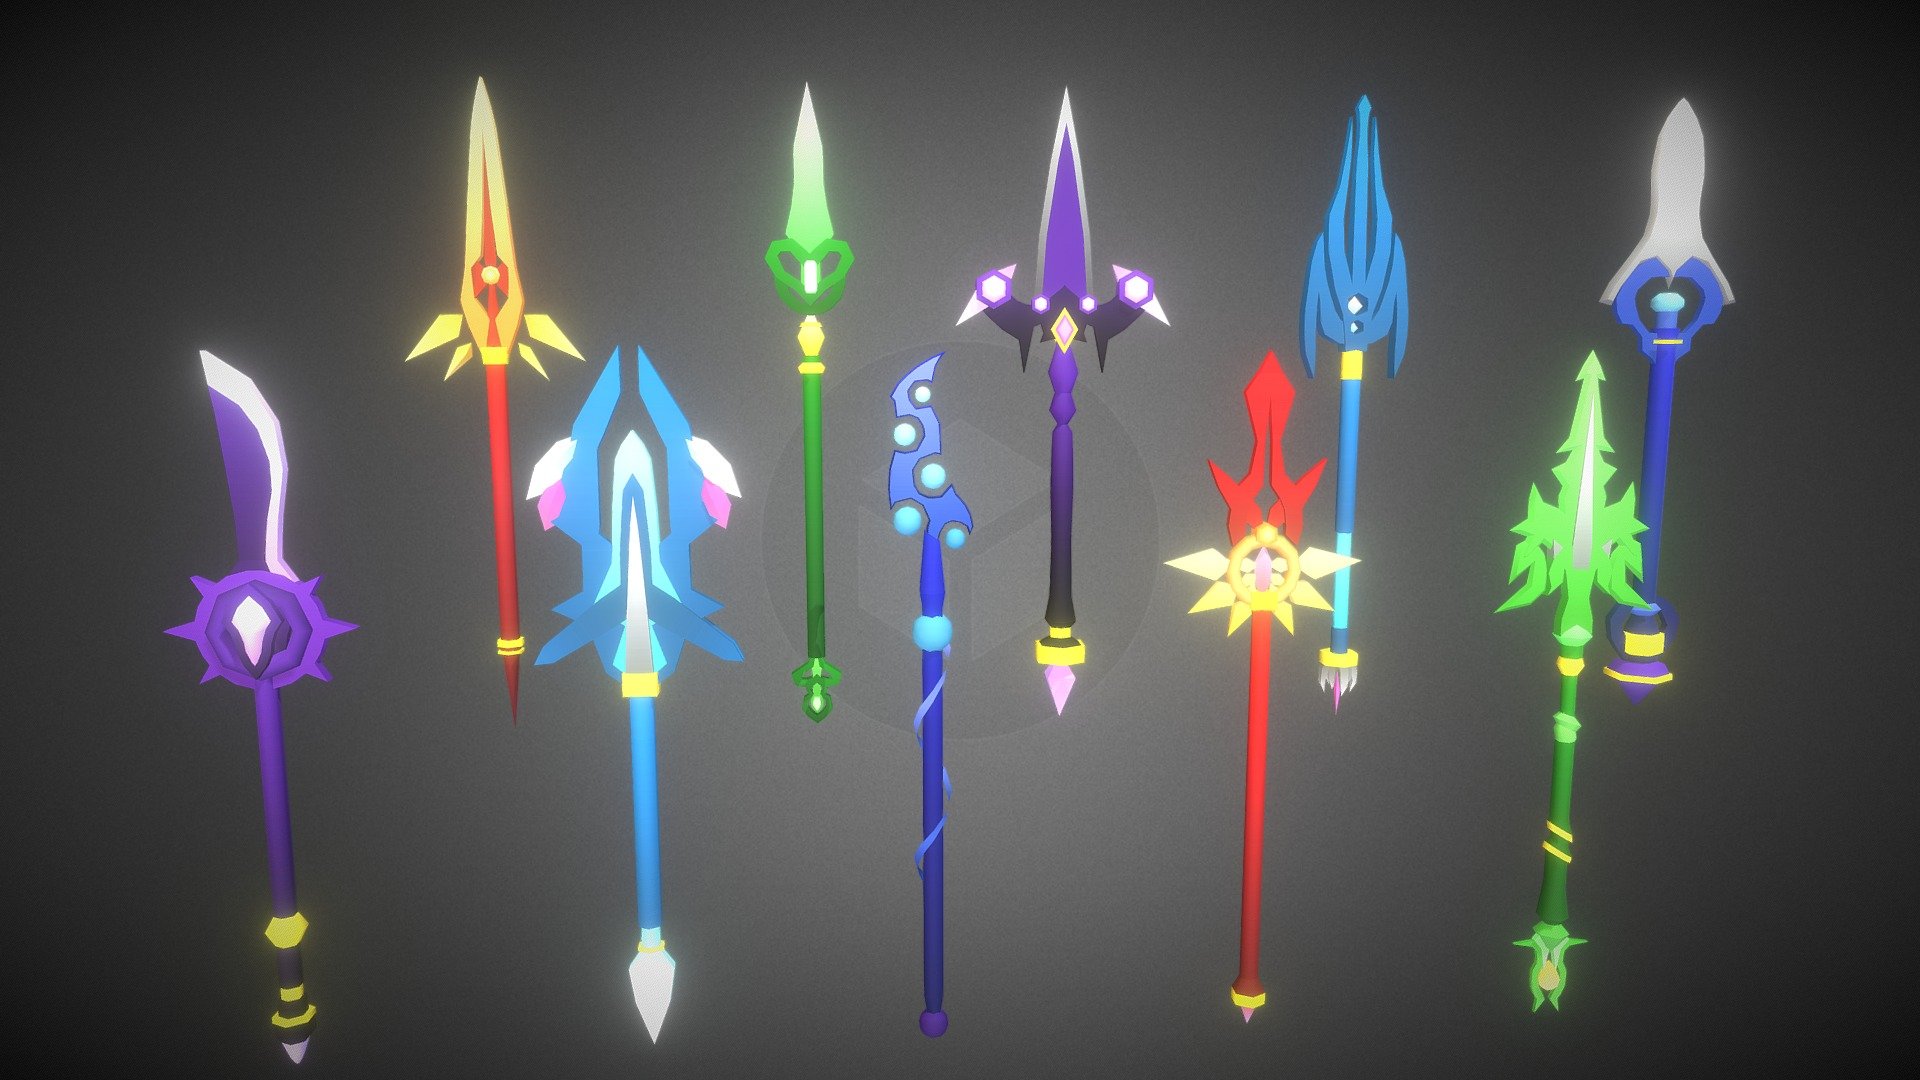 This pack contains 10 spears. For each spear, there is 5 color variants linked with an element.

The five elements :




Dark

Fire

Ice

Nature

Water

There is a total of 50 possibilities.

5 textures.

All texture resolution is 2048x2048.

Average Spear triangle count : 833

Maximum Spear triangle count : 1042

Minimum Spear triangle count : 588

this pack contains Low Poly Spears 3d model